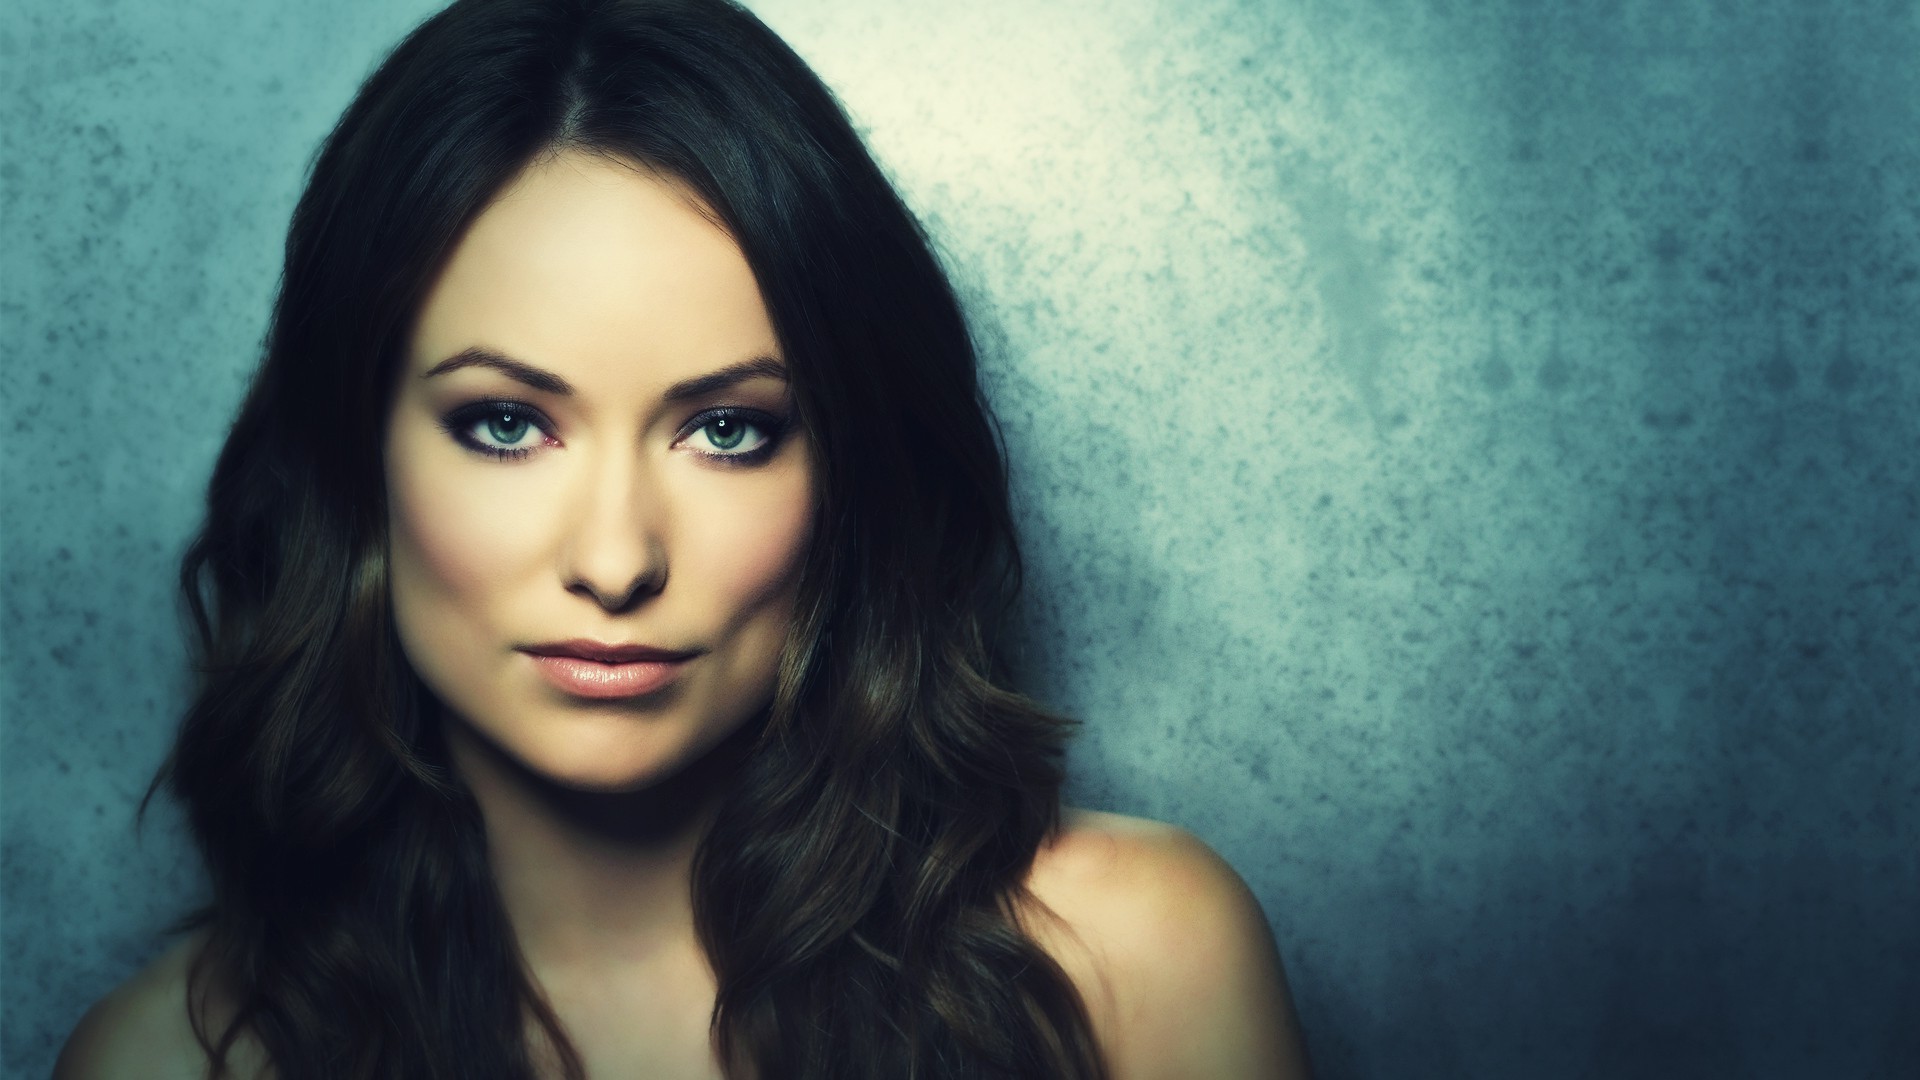 Olivia Wilde Wallpapers | Olivia Wilde Full HD Quality Wallpapers